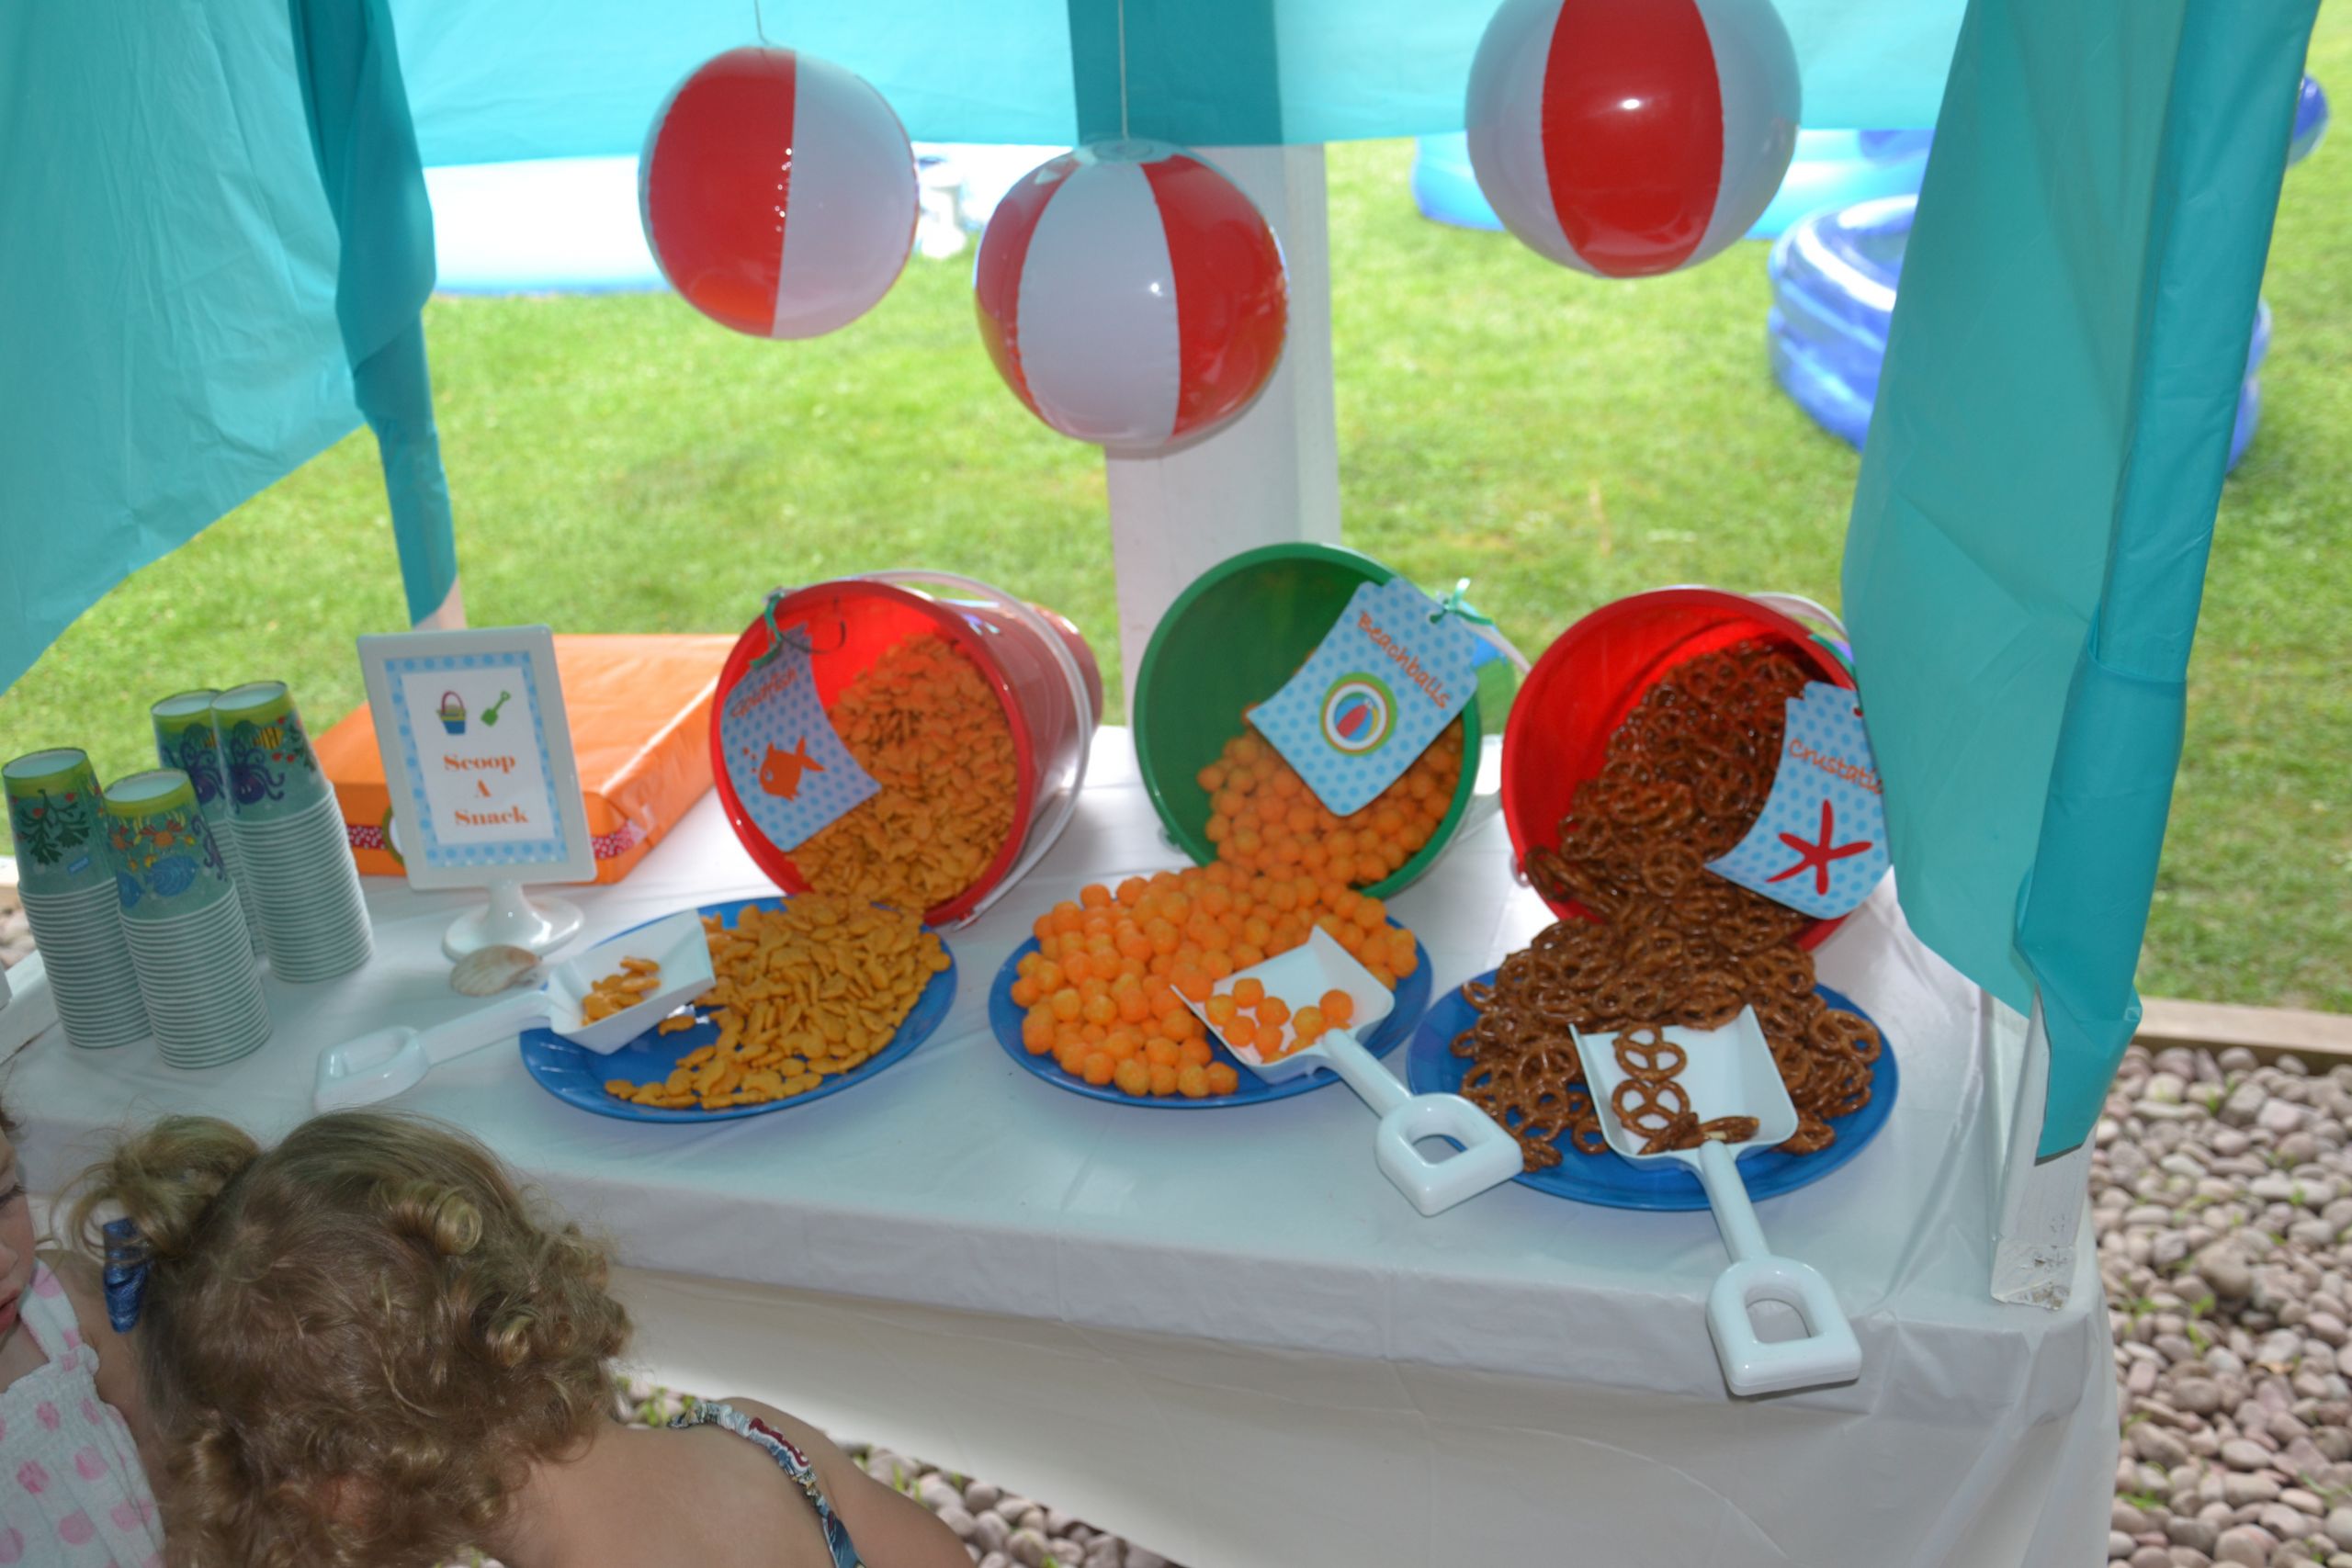 Kids Beach Party Ideas
 Party on a Bud  Ideas for Serving Summer Snacks